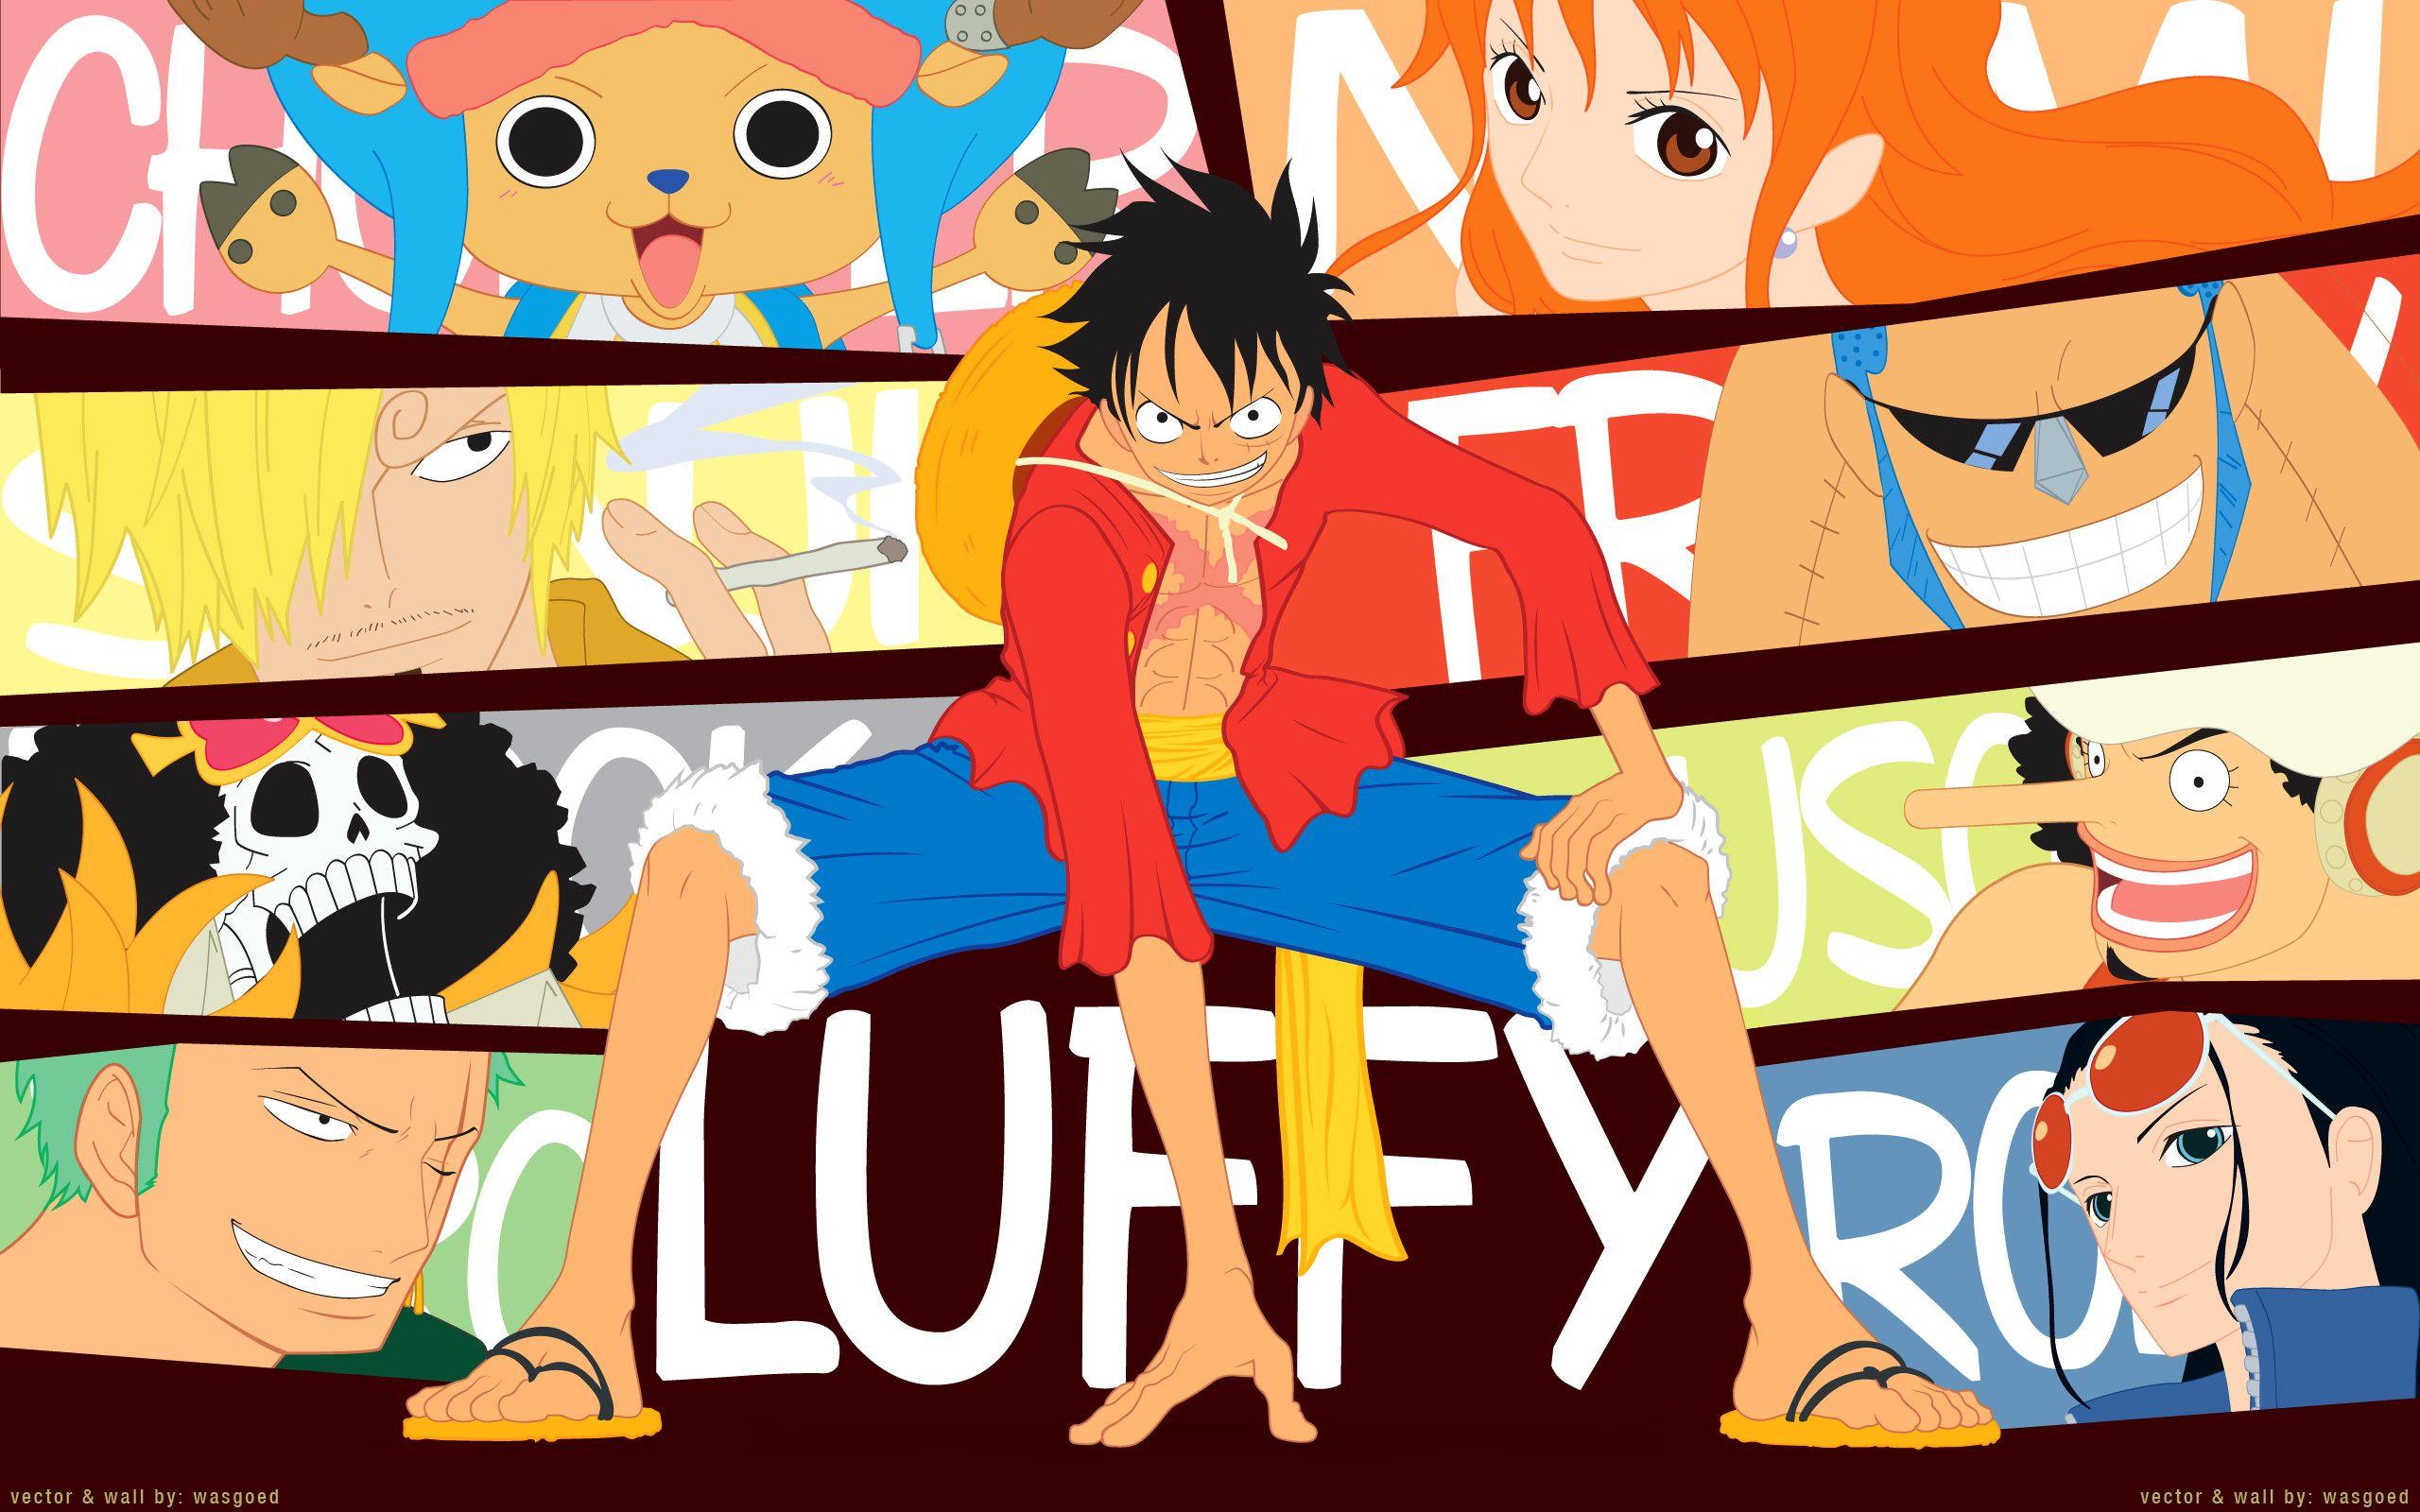 Amazing One Piece Wallpaper. Daily Anime Art